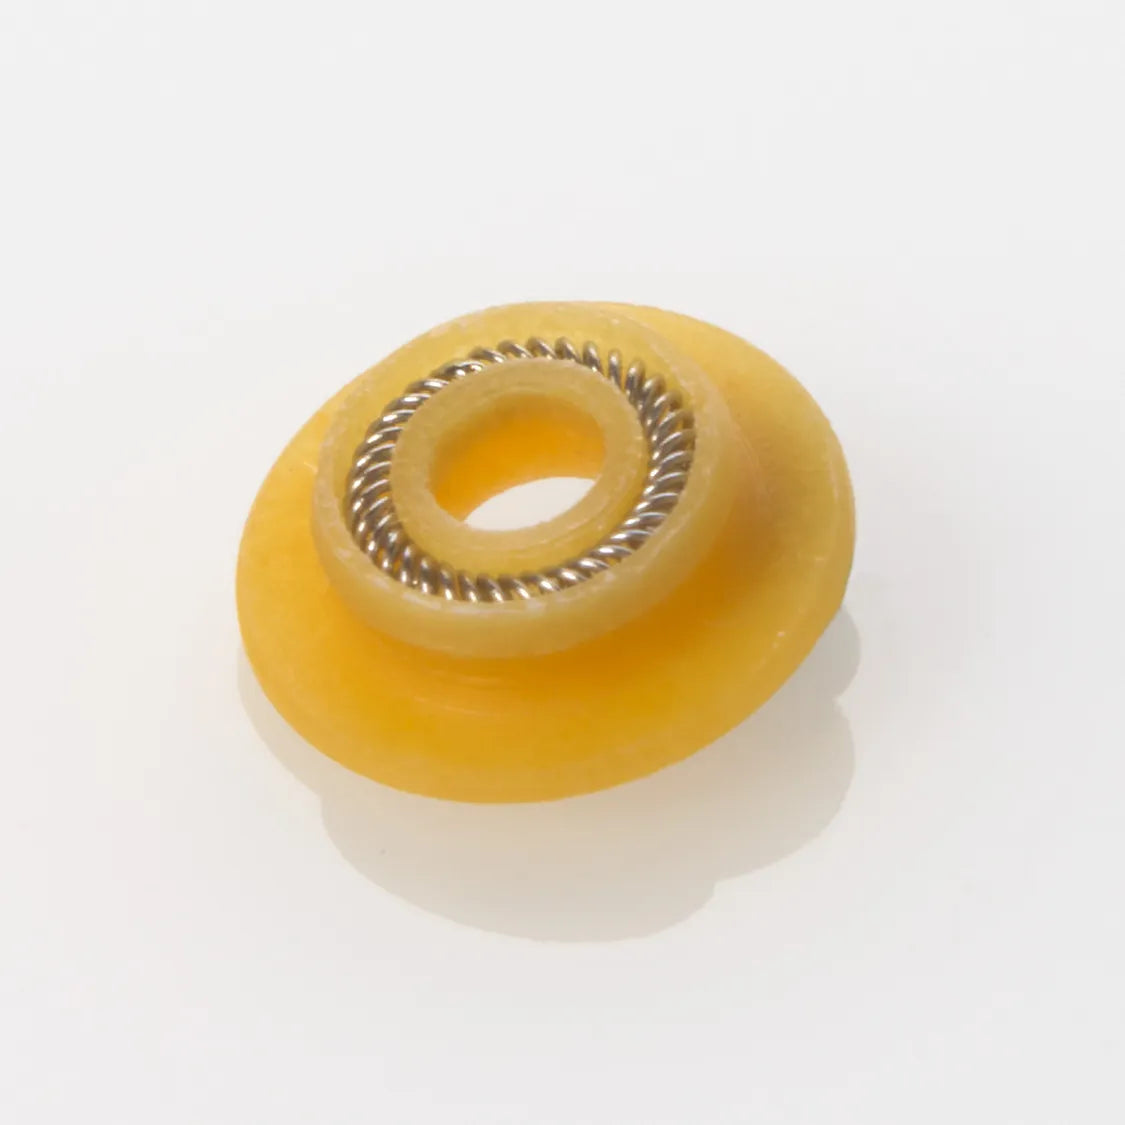 Gold Plunger Seal, Comparable to Shimadzu # 228-32628-91, 4427161(Sciex™)